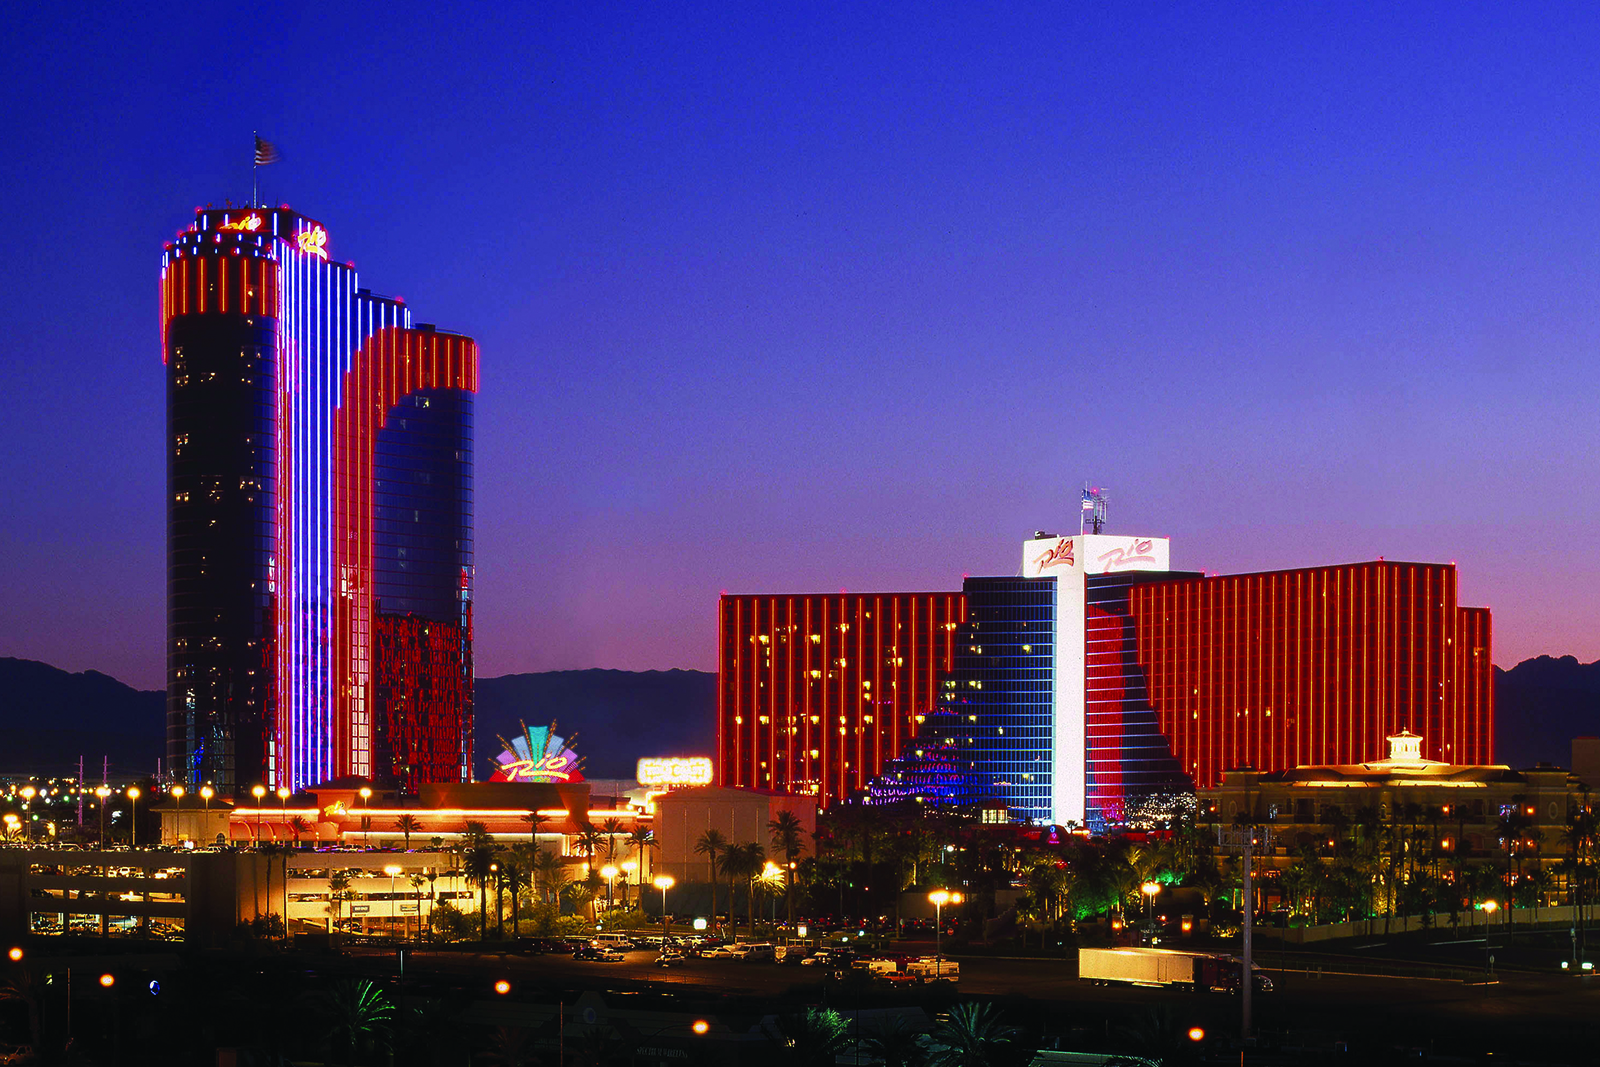 Rio All Suite Hotel  casino, buffet, zipline, shows, and restaurants. Located in Las Vegas, NV.